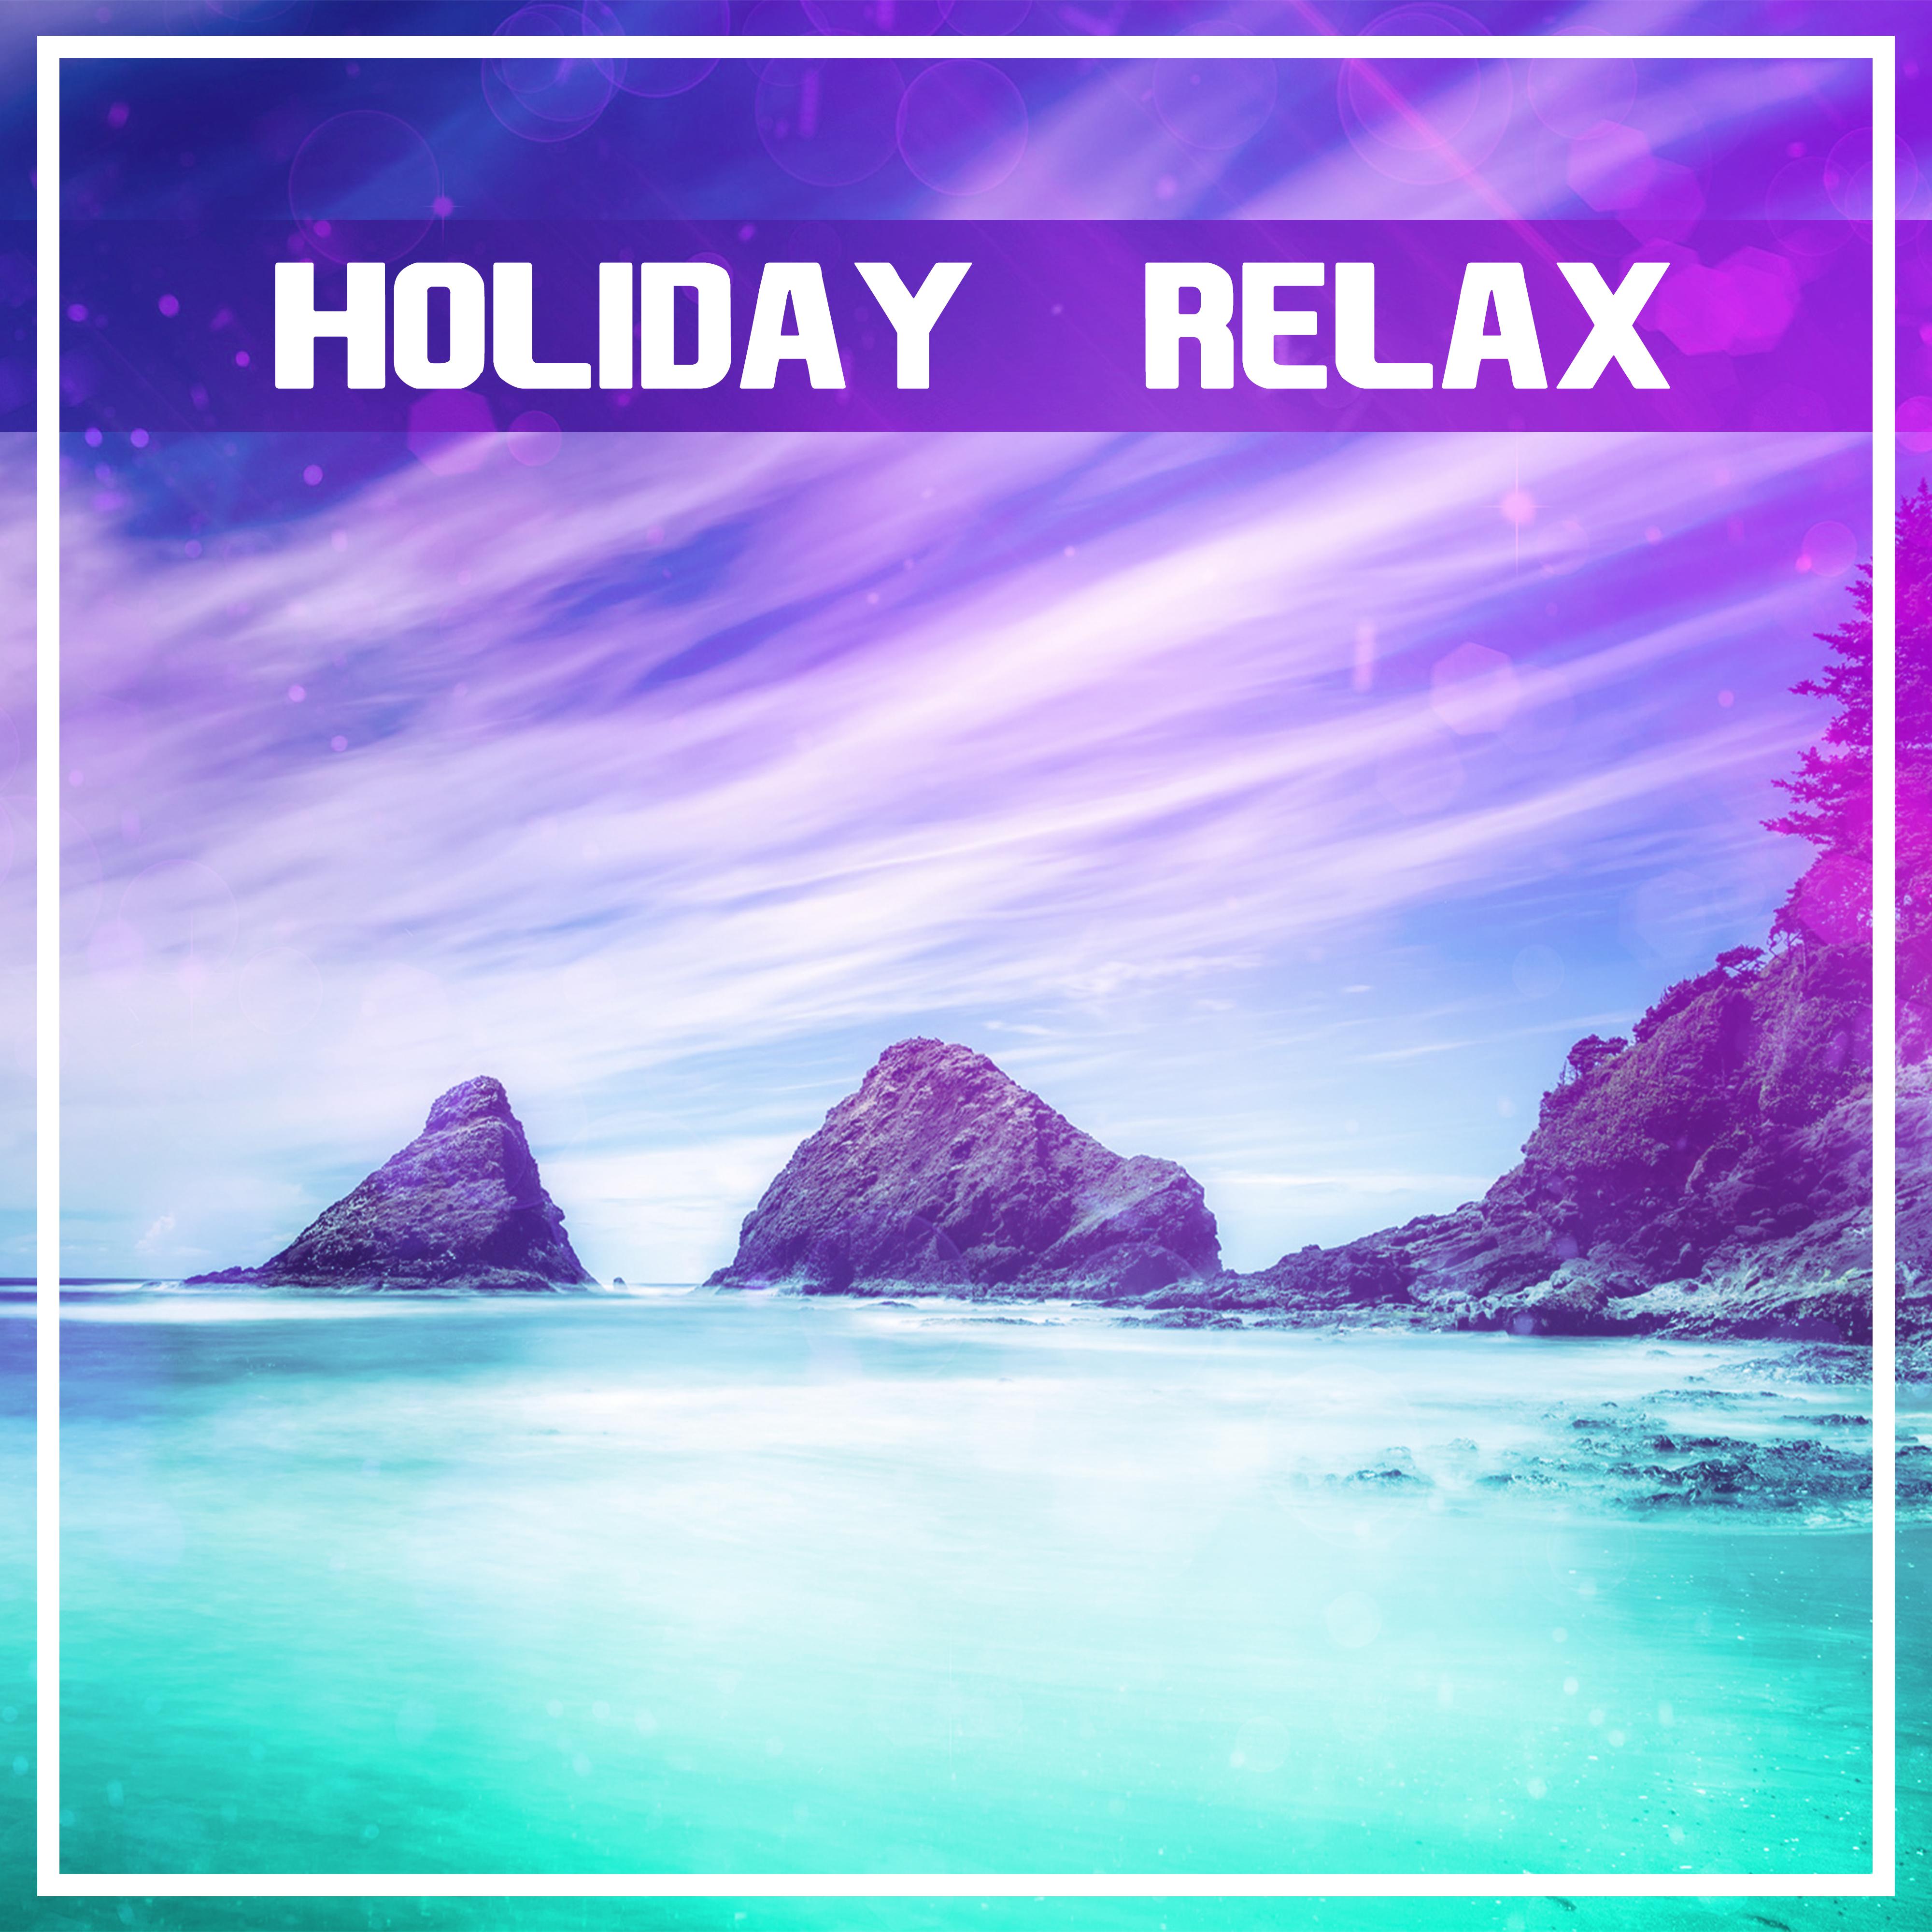 Holiday & Relax – Summer Chill, Ibiza Lounge, Sunshine, Deep Chillout, Relax Under Palms, Stress Free, Holiday Chill Out Music